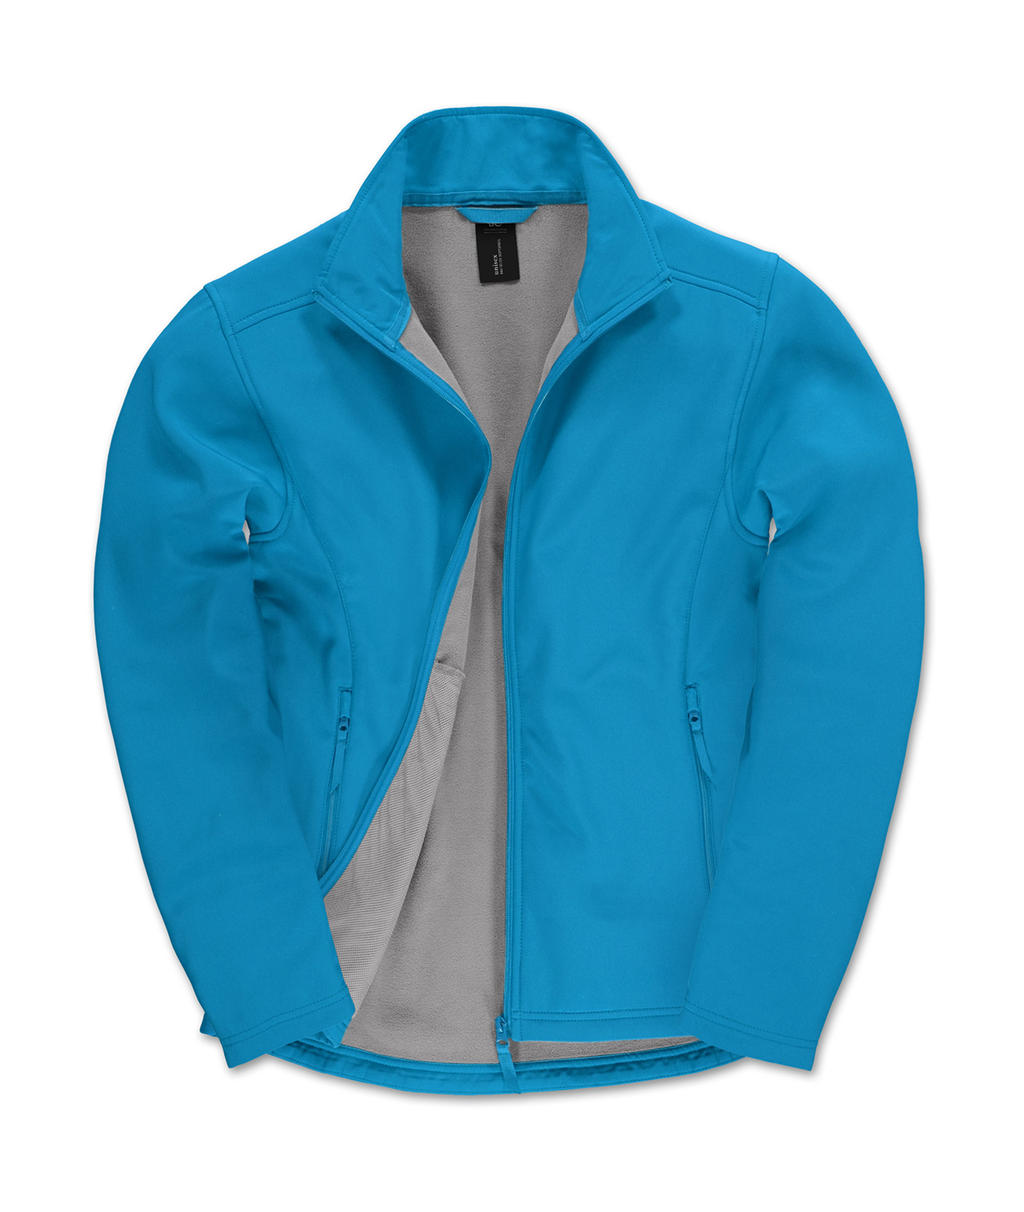 B and c - softshell id. 701 hombre - 445. 42